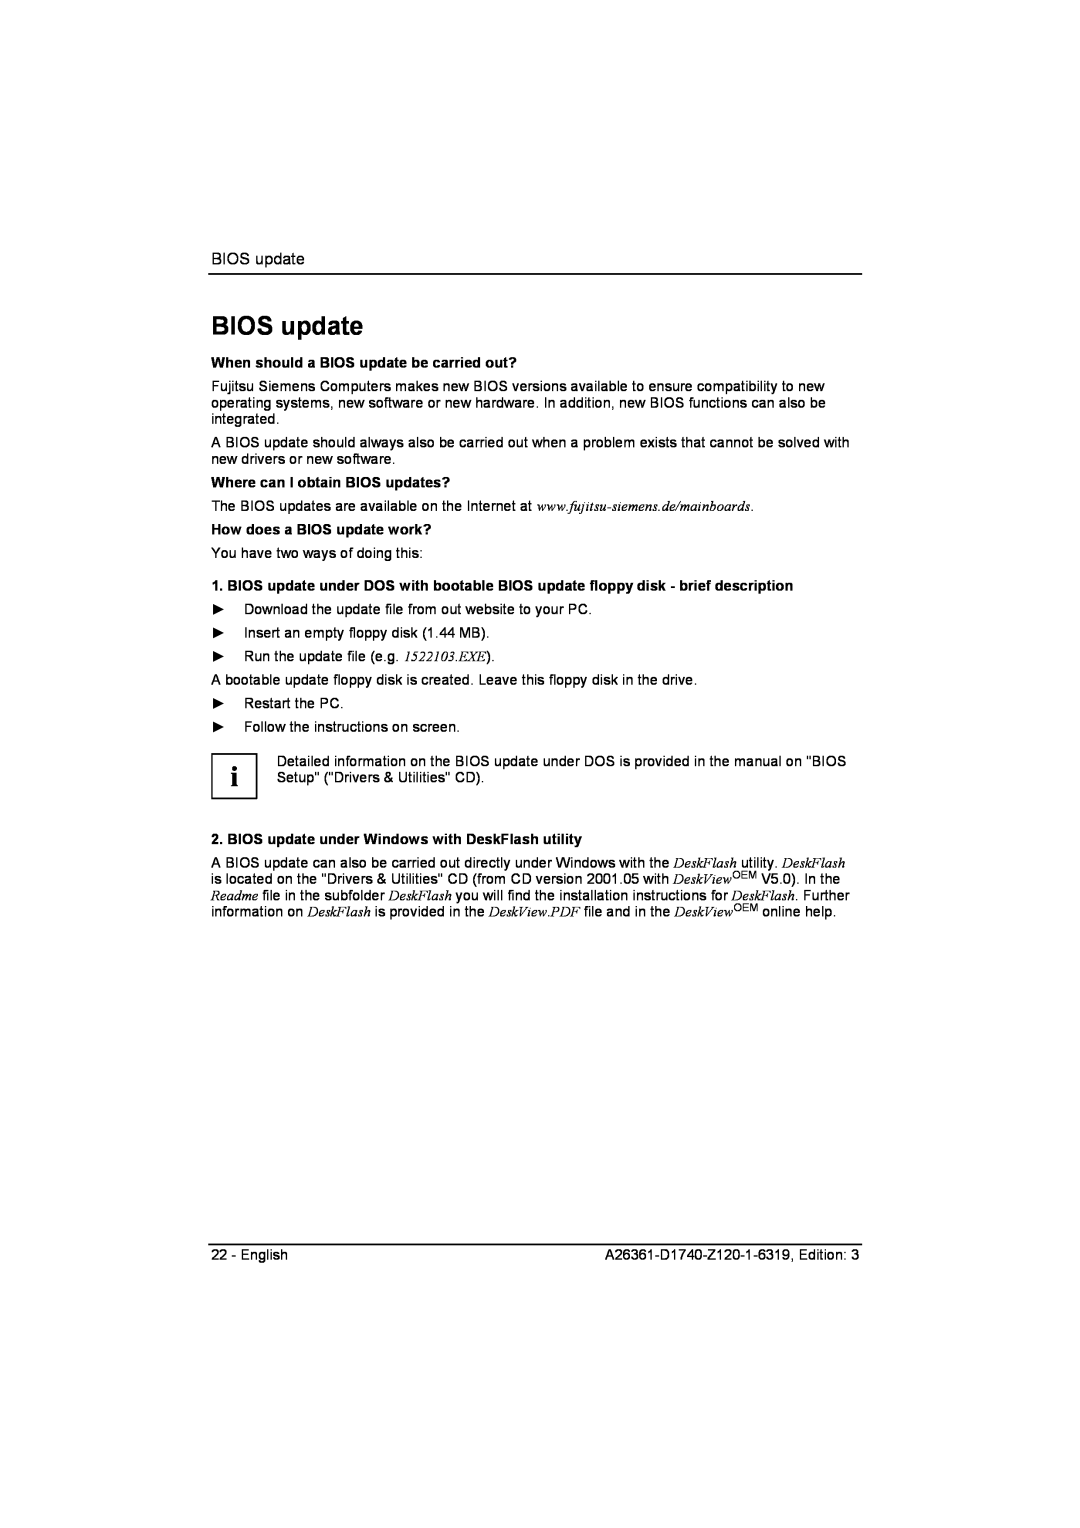 Fujitsu D1740 technical manual When should a BIOS update be carried out?, Where can I obtain BIOS updates? 